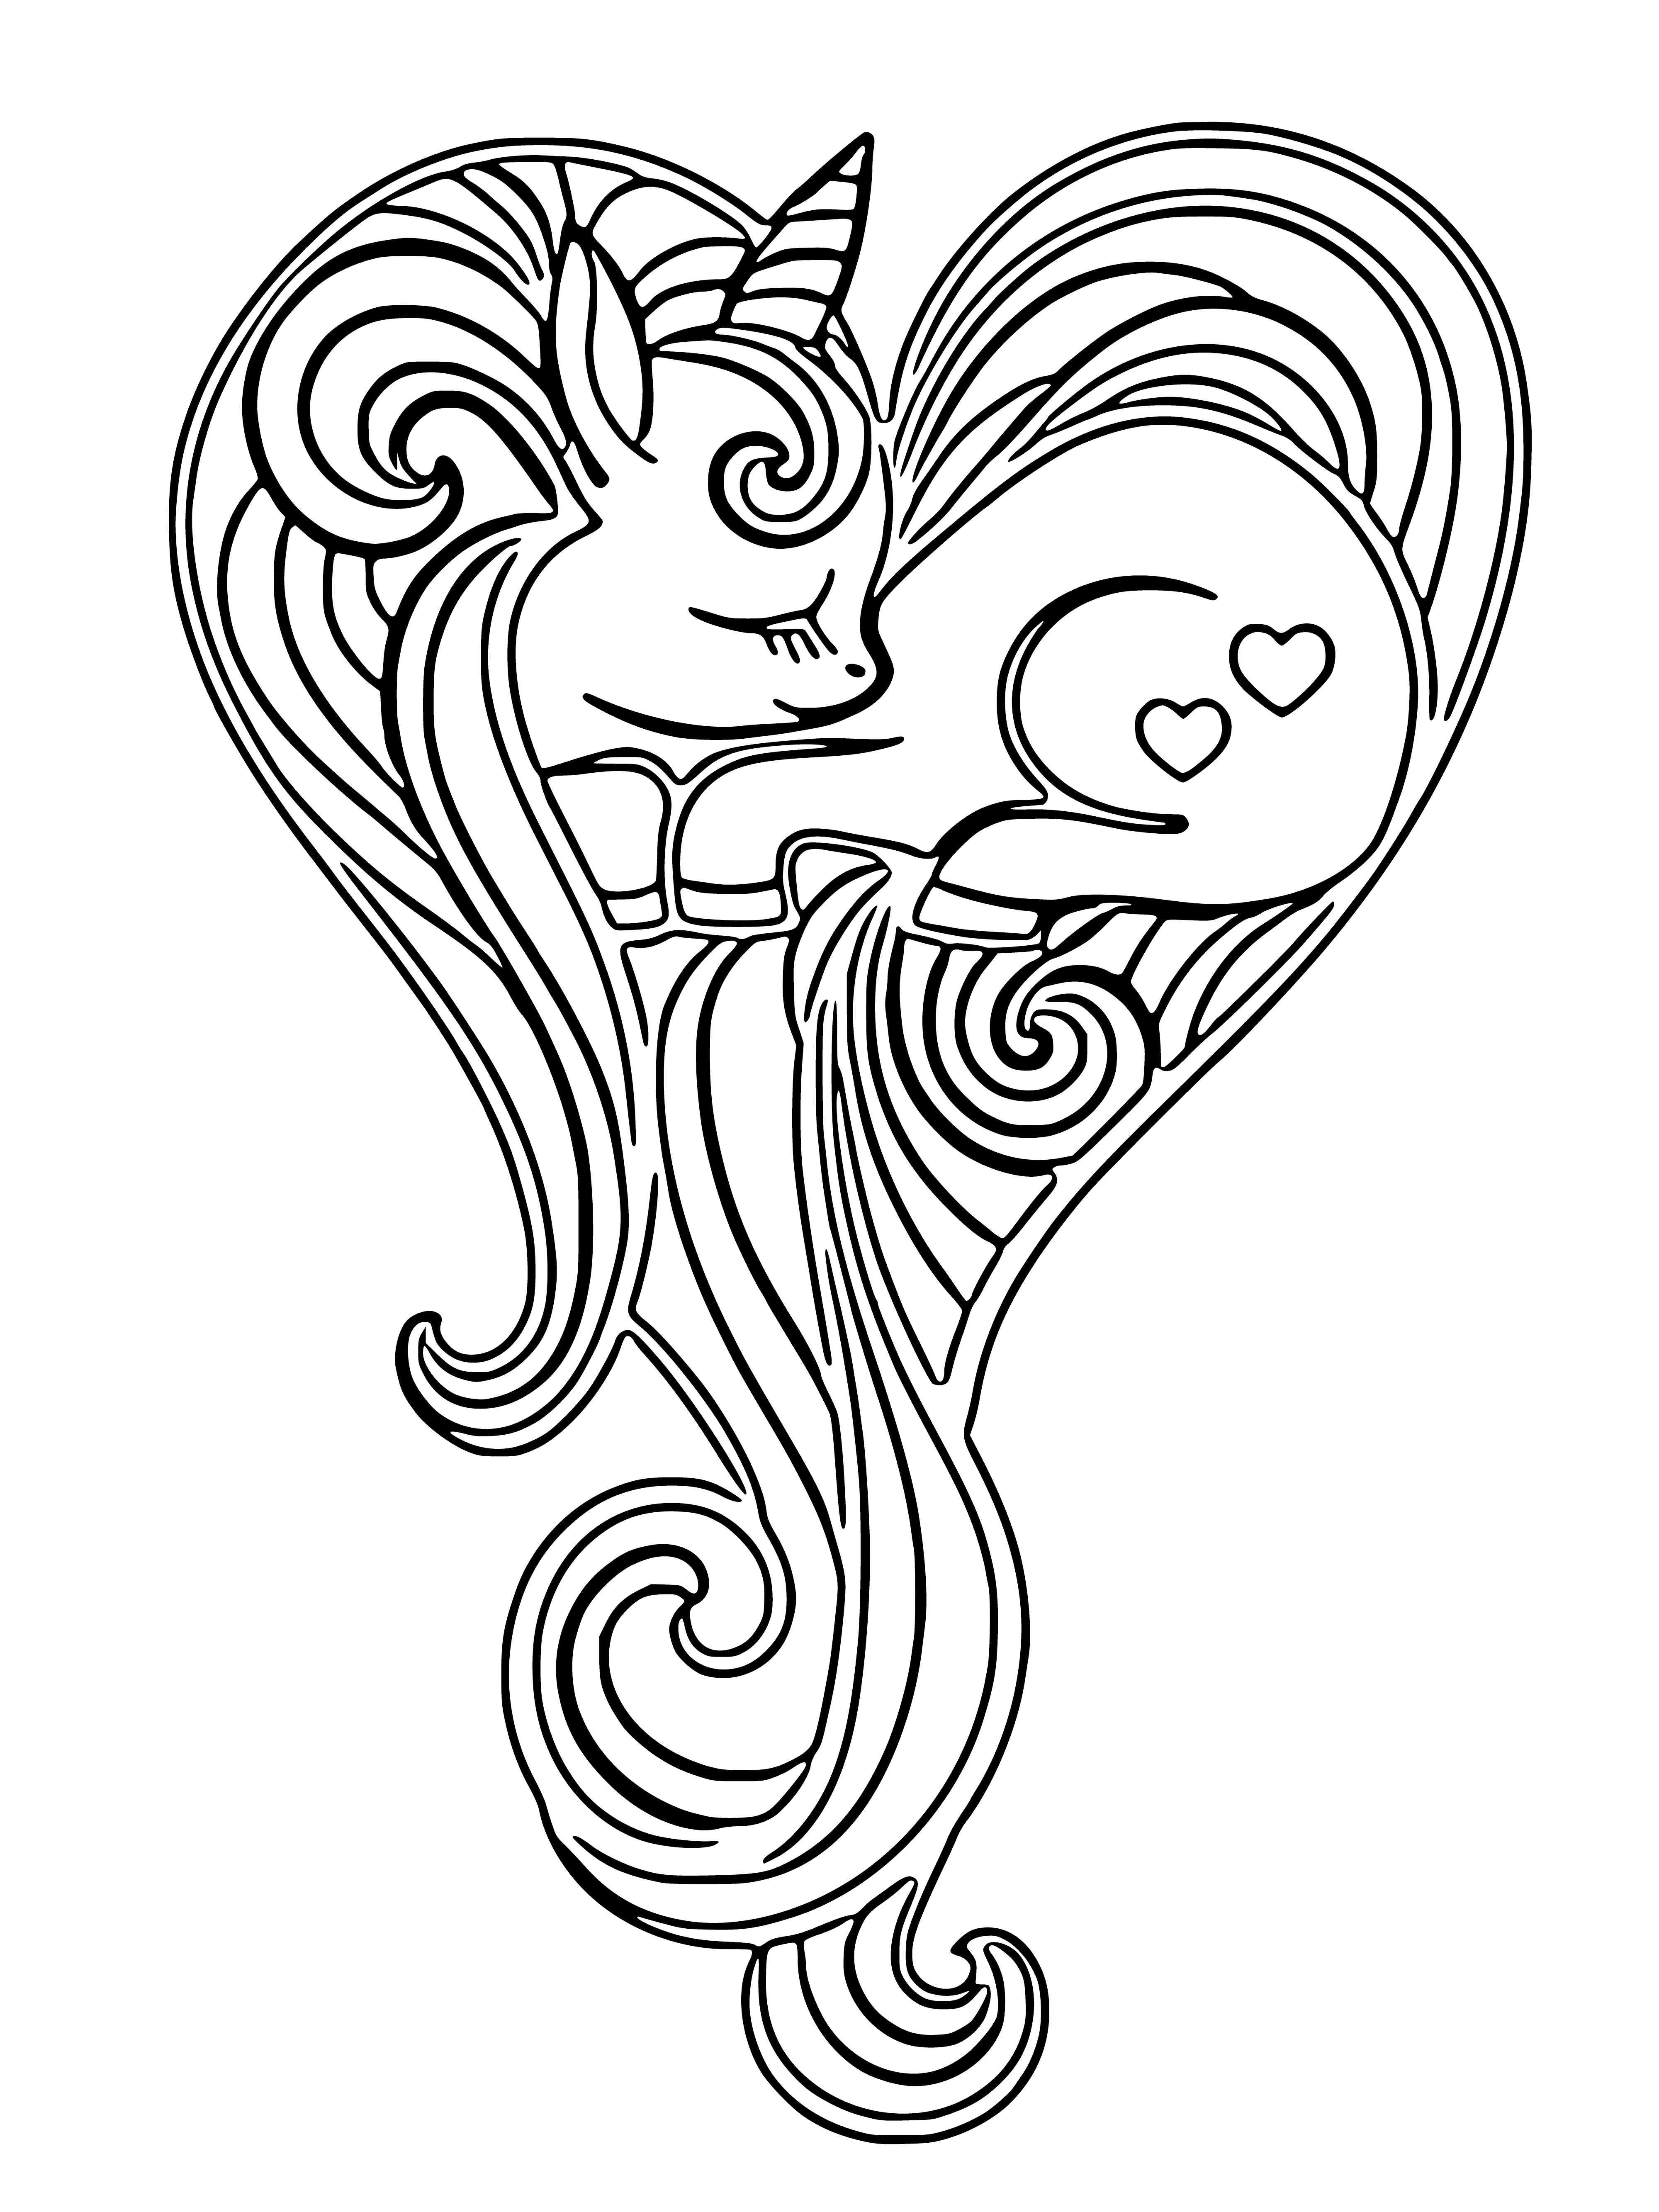 coloring page: A sleeping unicorn with black mane & tail, white body, gold horn & hooves, stars & flowers around it. #DreamyUnicorn